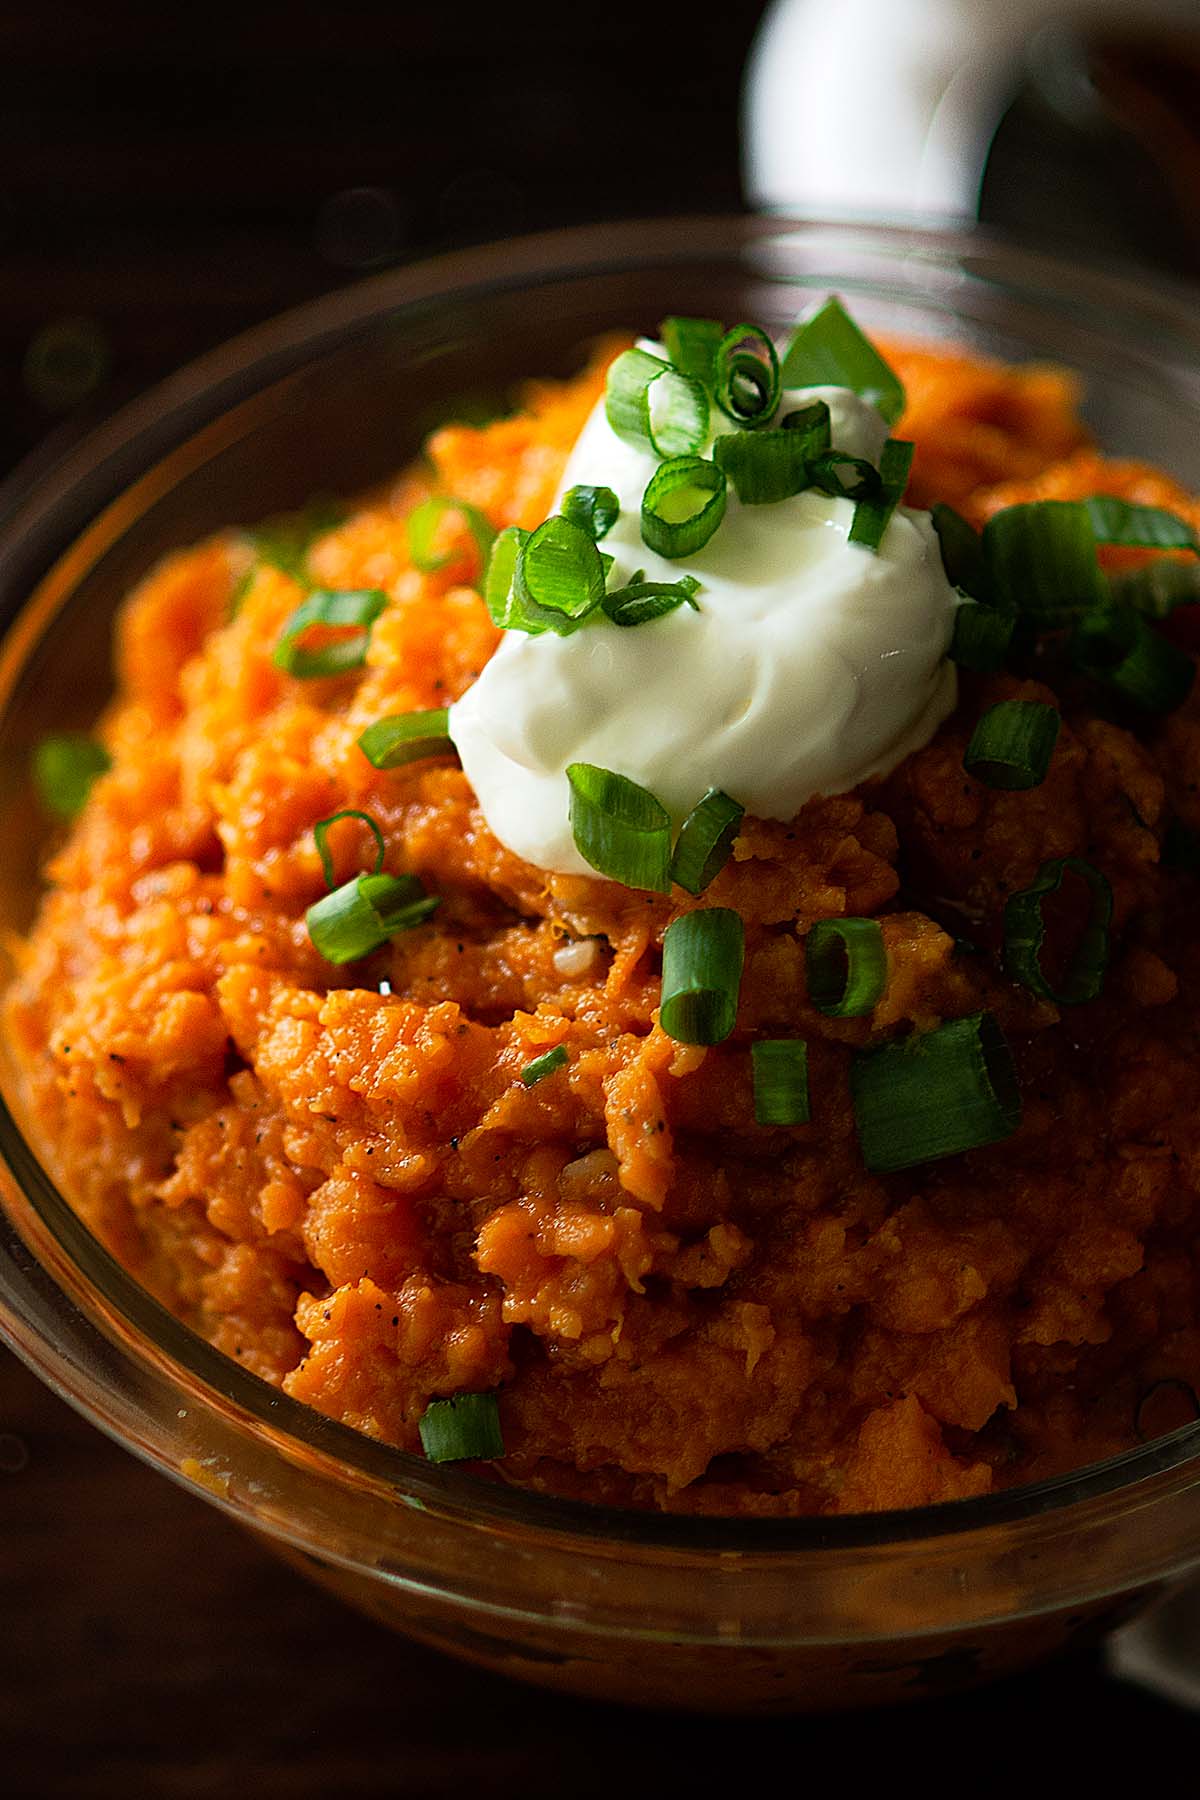 Mashed sweet potatoes in a serving dish topped with sour cream and sliced green onions.